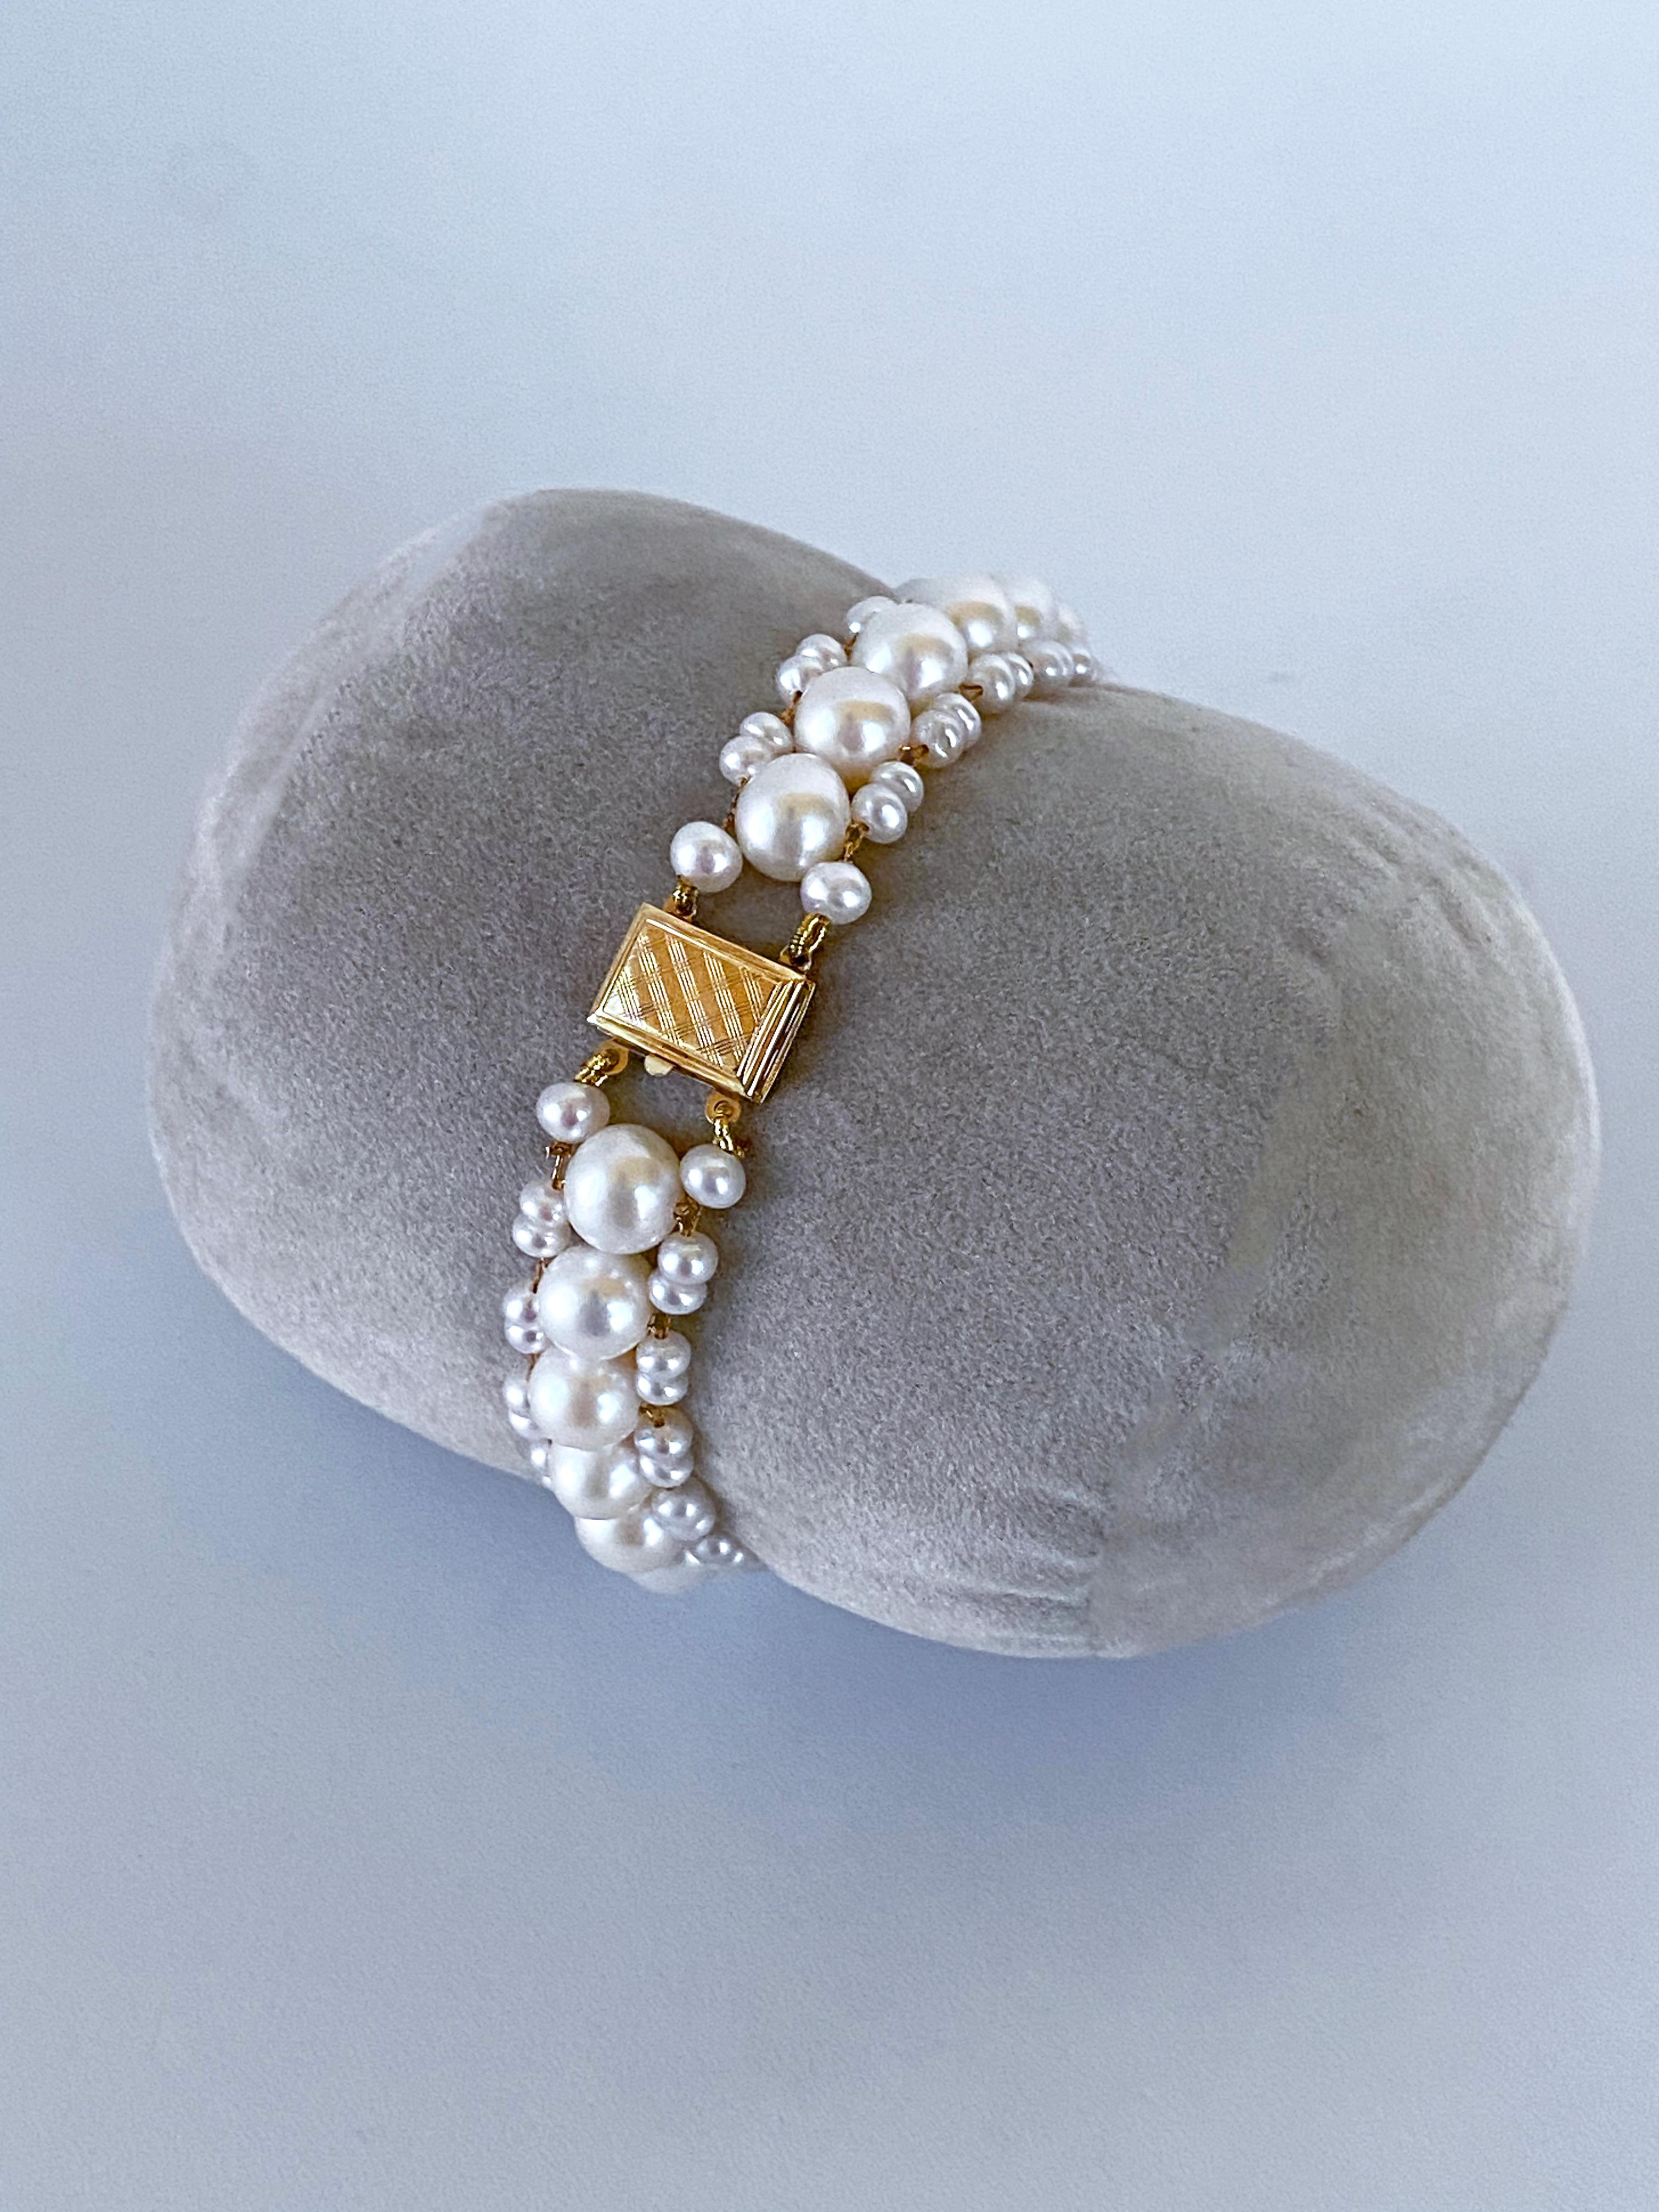 Gorgeous, simple and elegant piece by Marina J. This Bracelet is made of all cultured white Pearls with a soft iridescent luster. Gold thread is used to weave the Pearls into a column like design, which perfectly matches the Pearls' luster and